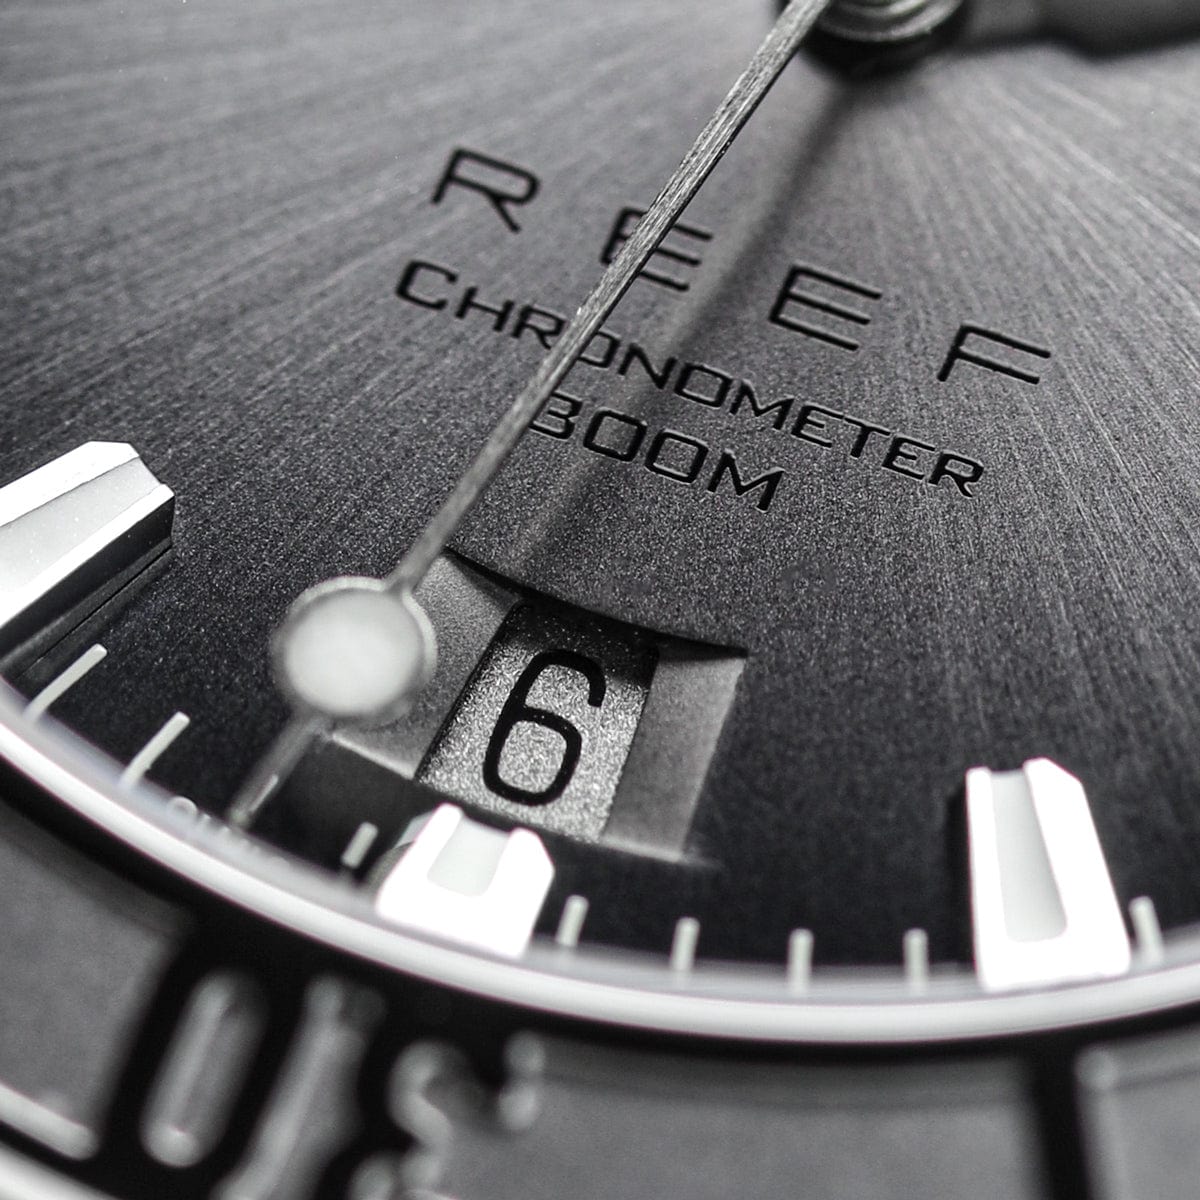 Formex REEF Automatic Chronometer - Silver Dial / Steel Bezel